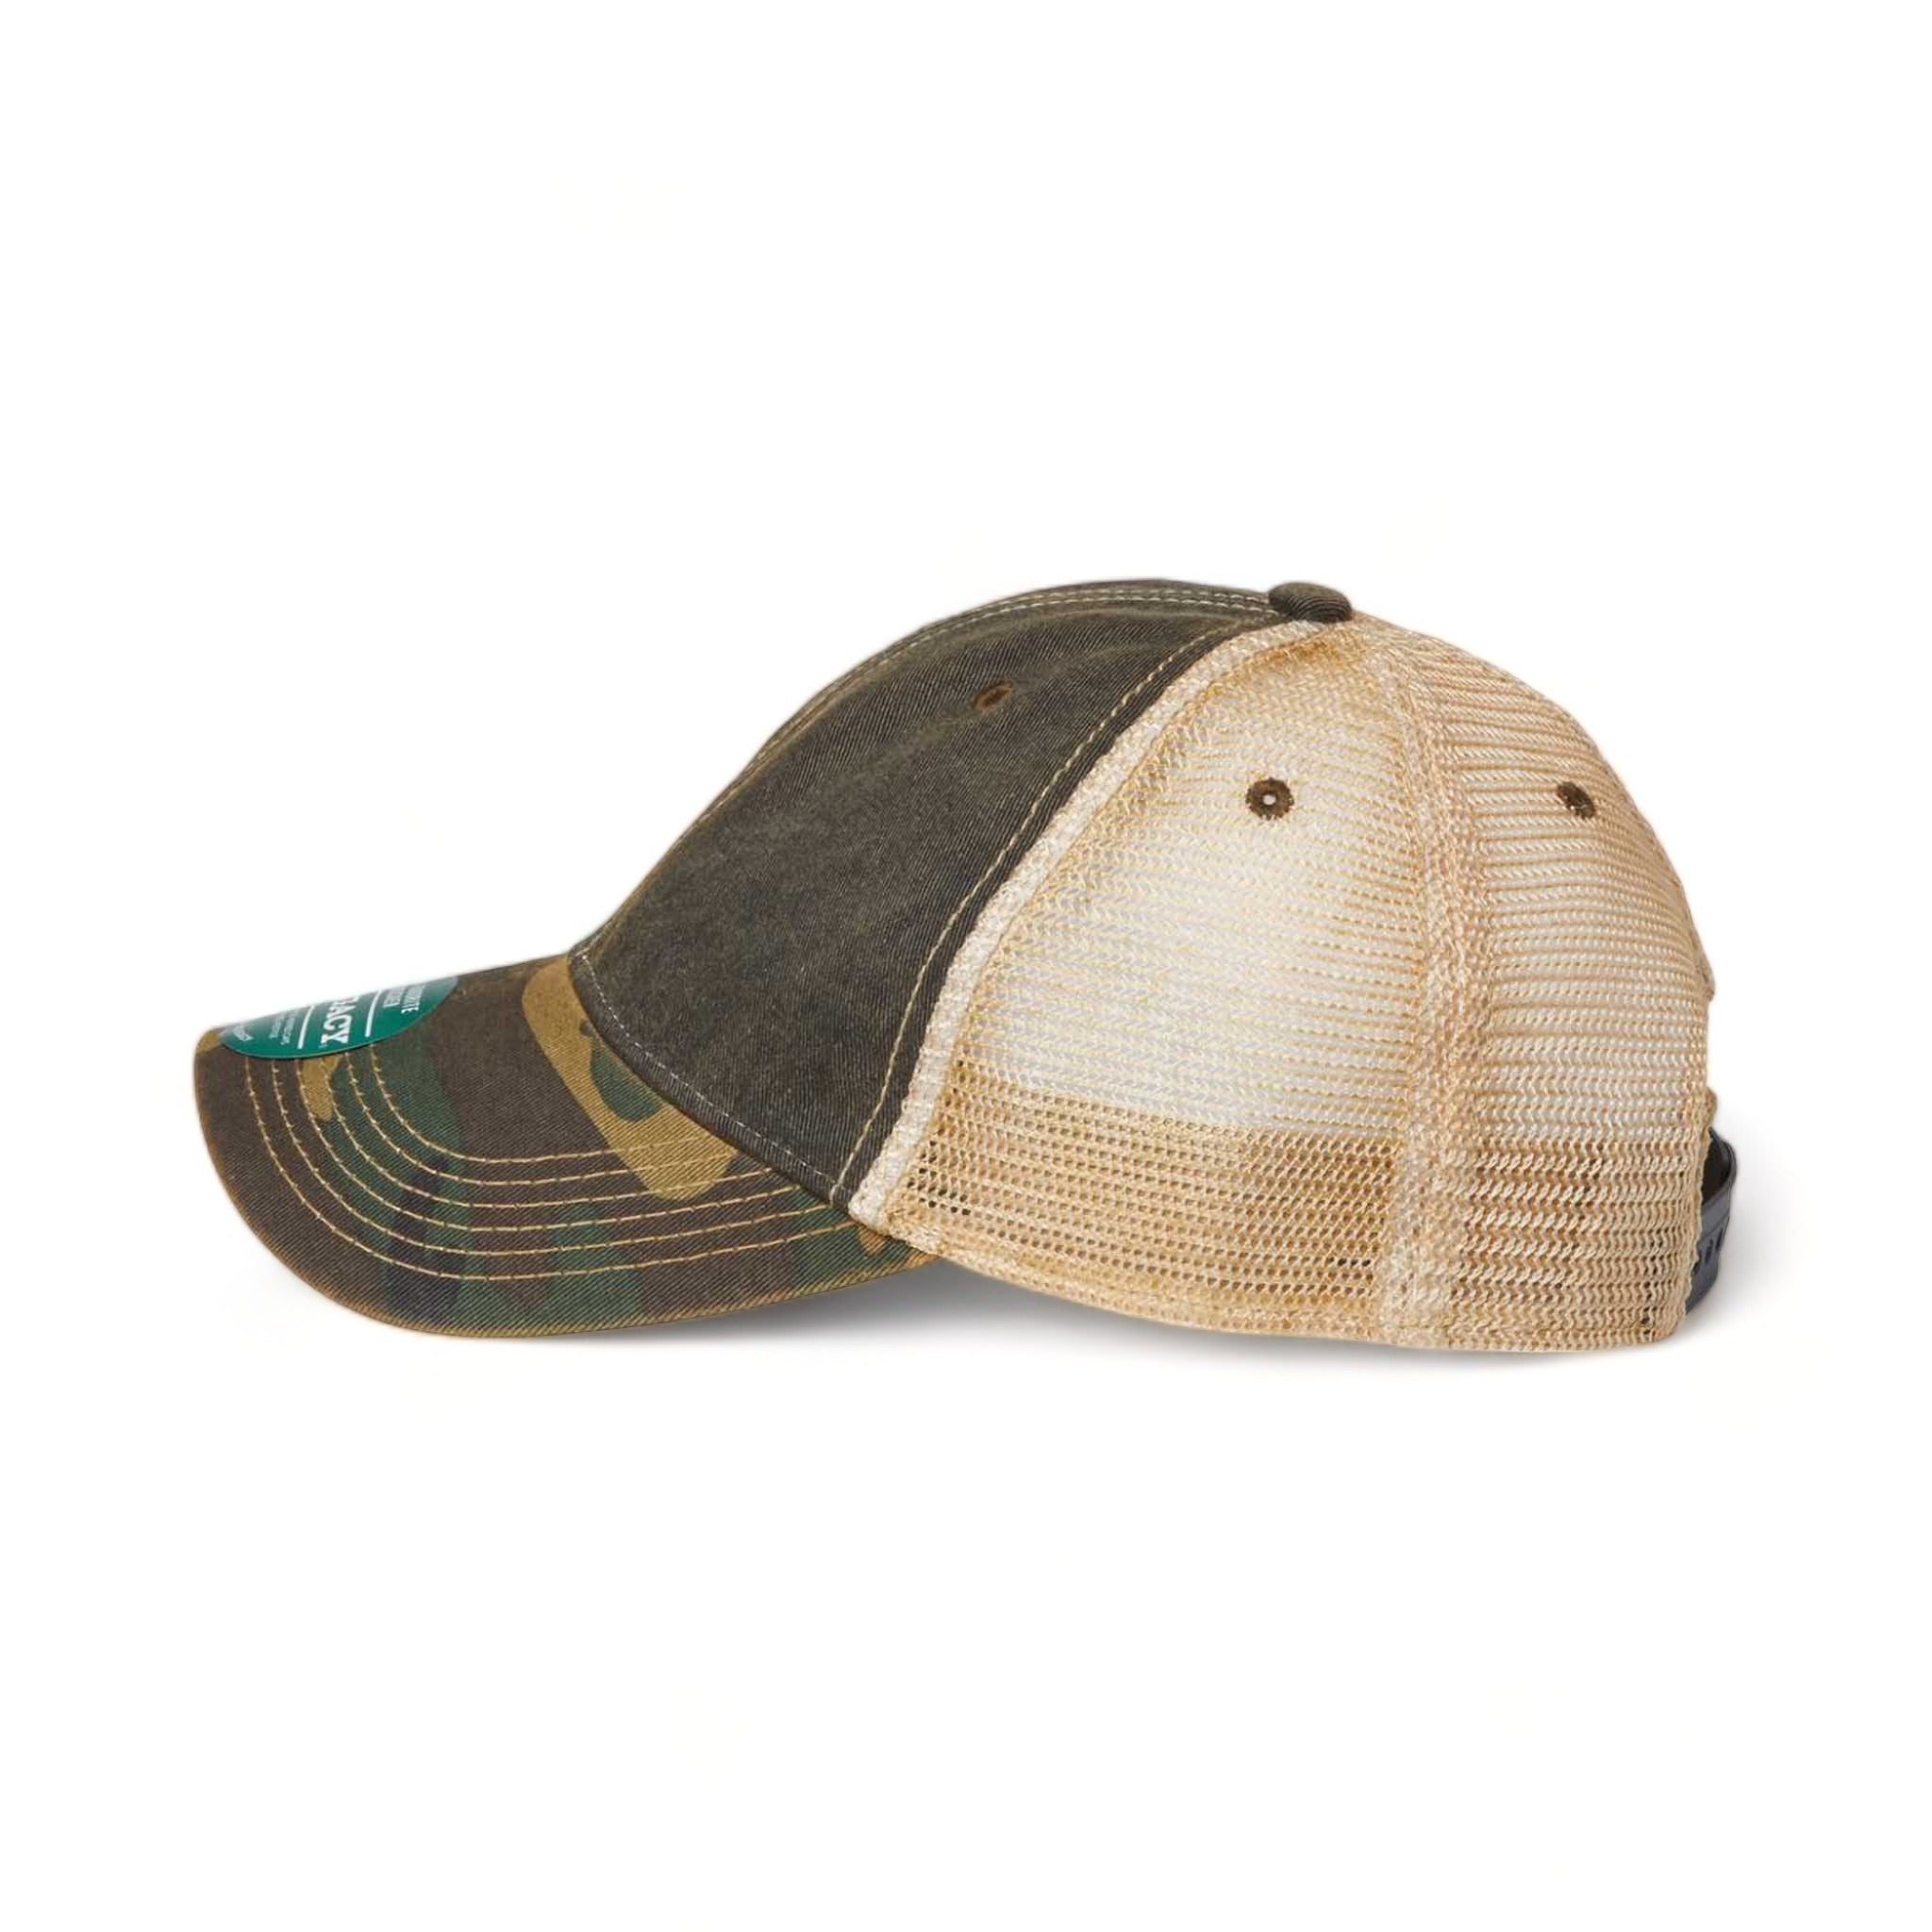 Side view of LEGACY OFA custom hat in black, army camo and khaki